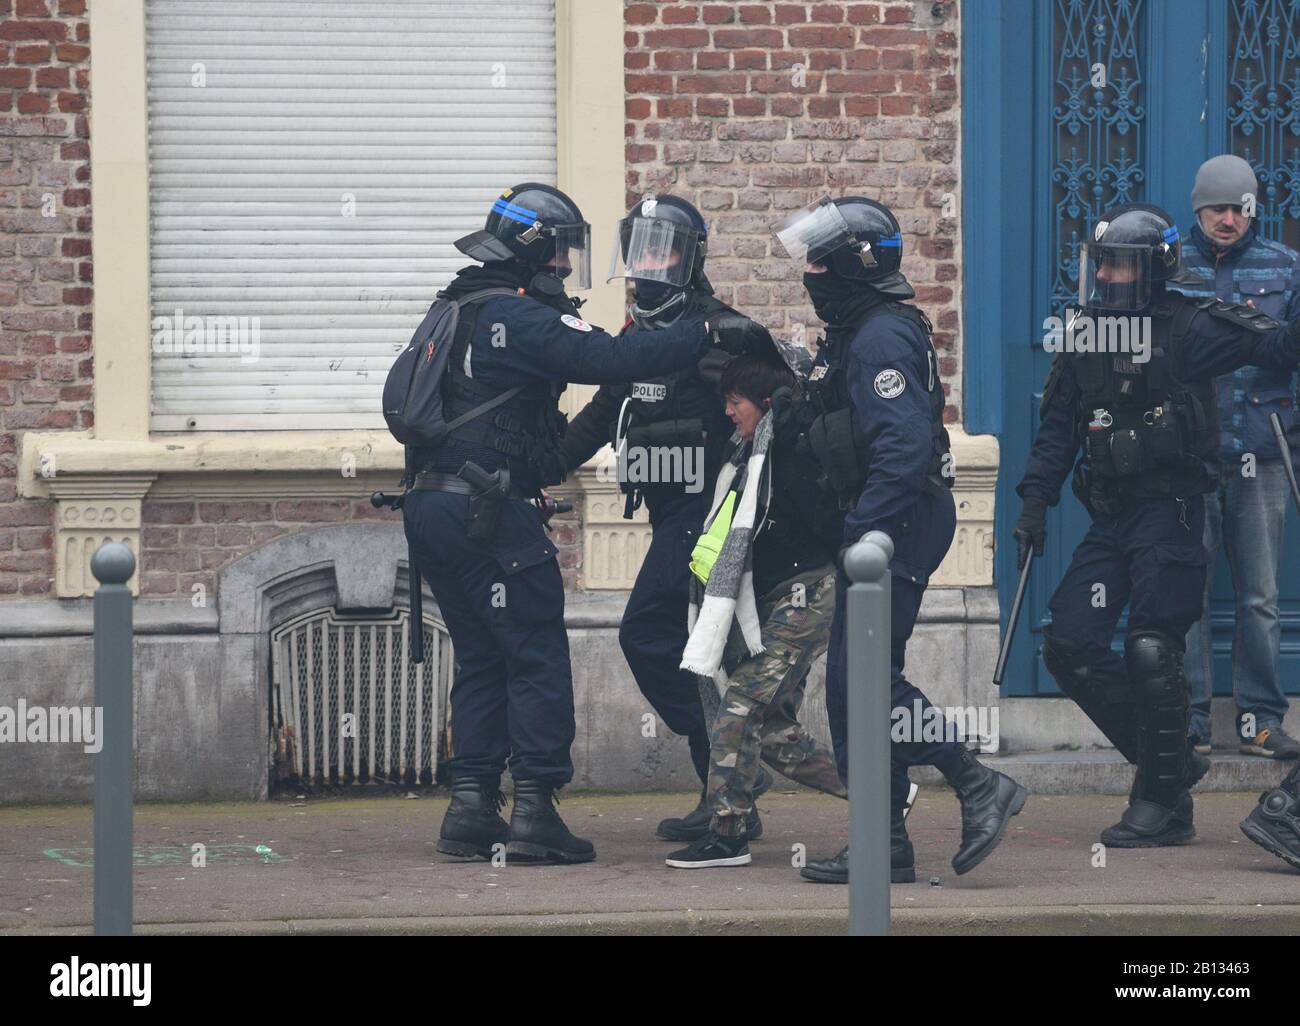 *** STRICTLY NO SALES TO FRENCH MEDIA OR PUBLISHERS *** February 22, 2020 - Lille, France: Riot police arrest a Yellow Vest activist. Hundreds of Yellow Vests gathered in the northern French city of Lille to mark the 67th consecutive week of protest against president Emmanuel Macron's policies. They were joined by black block activists and brief clashes erupted during their march. Stock Photo